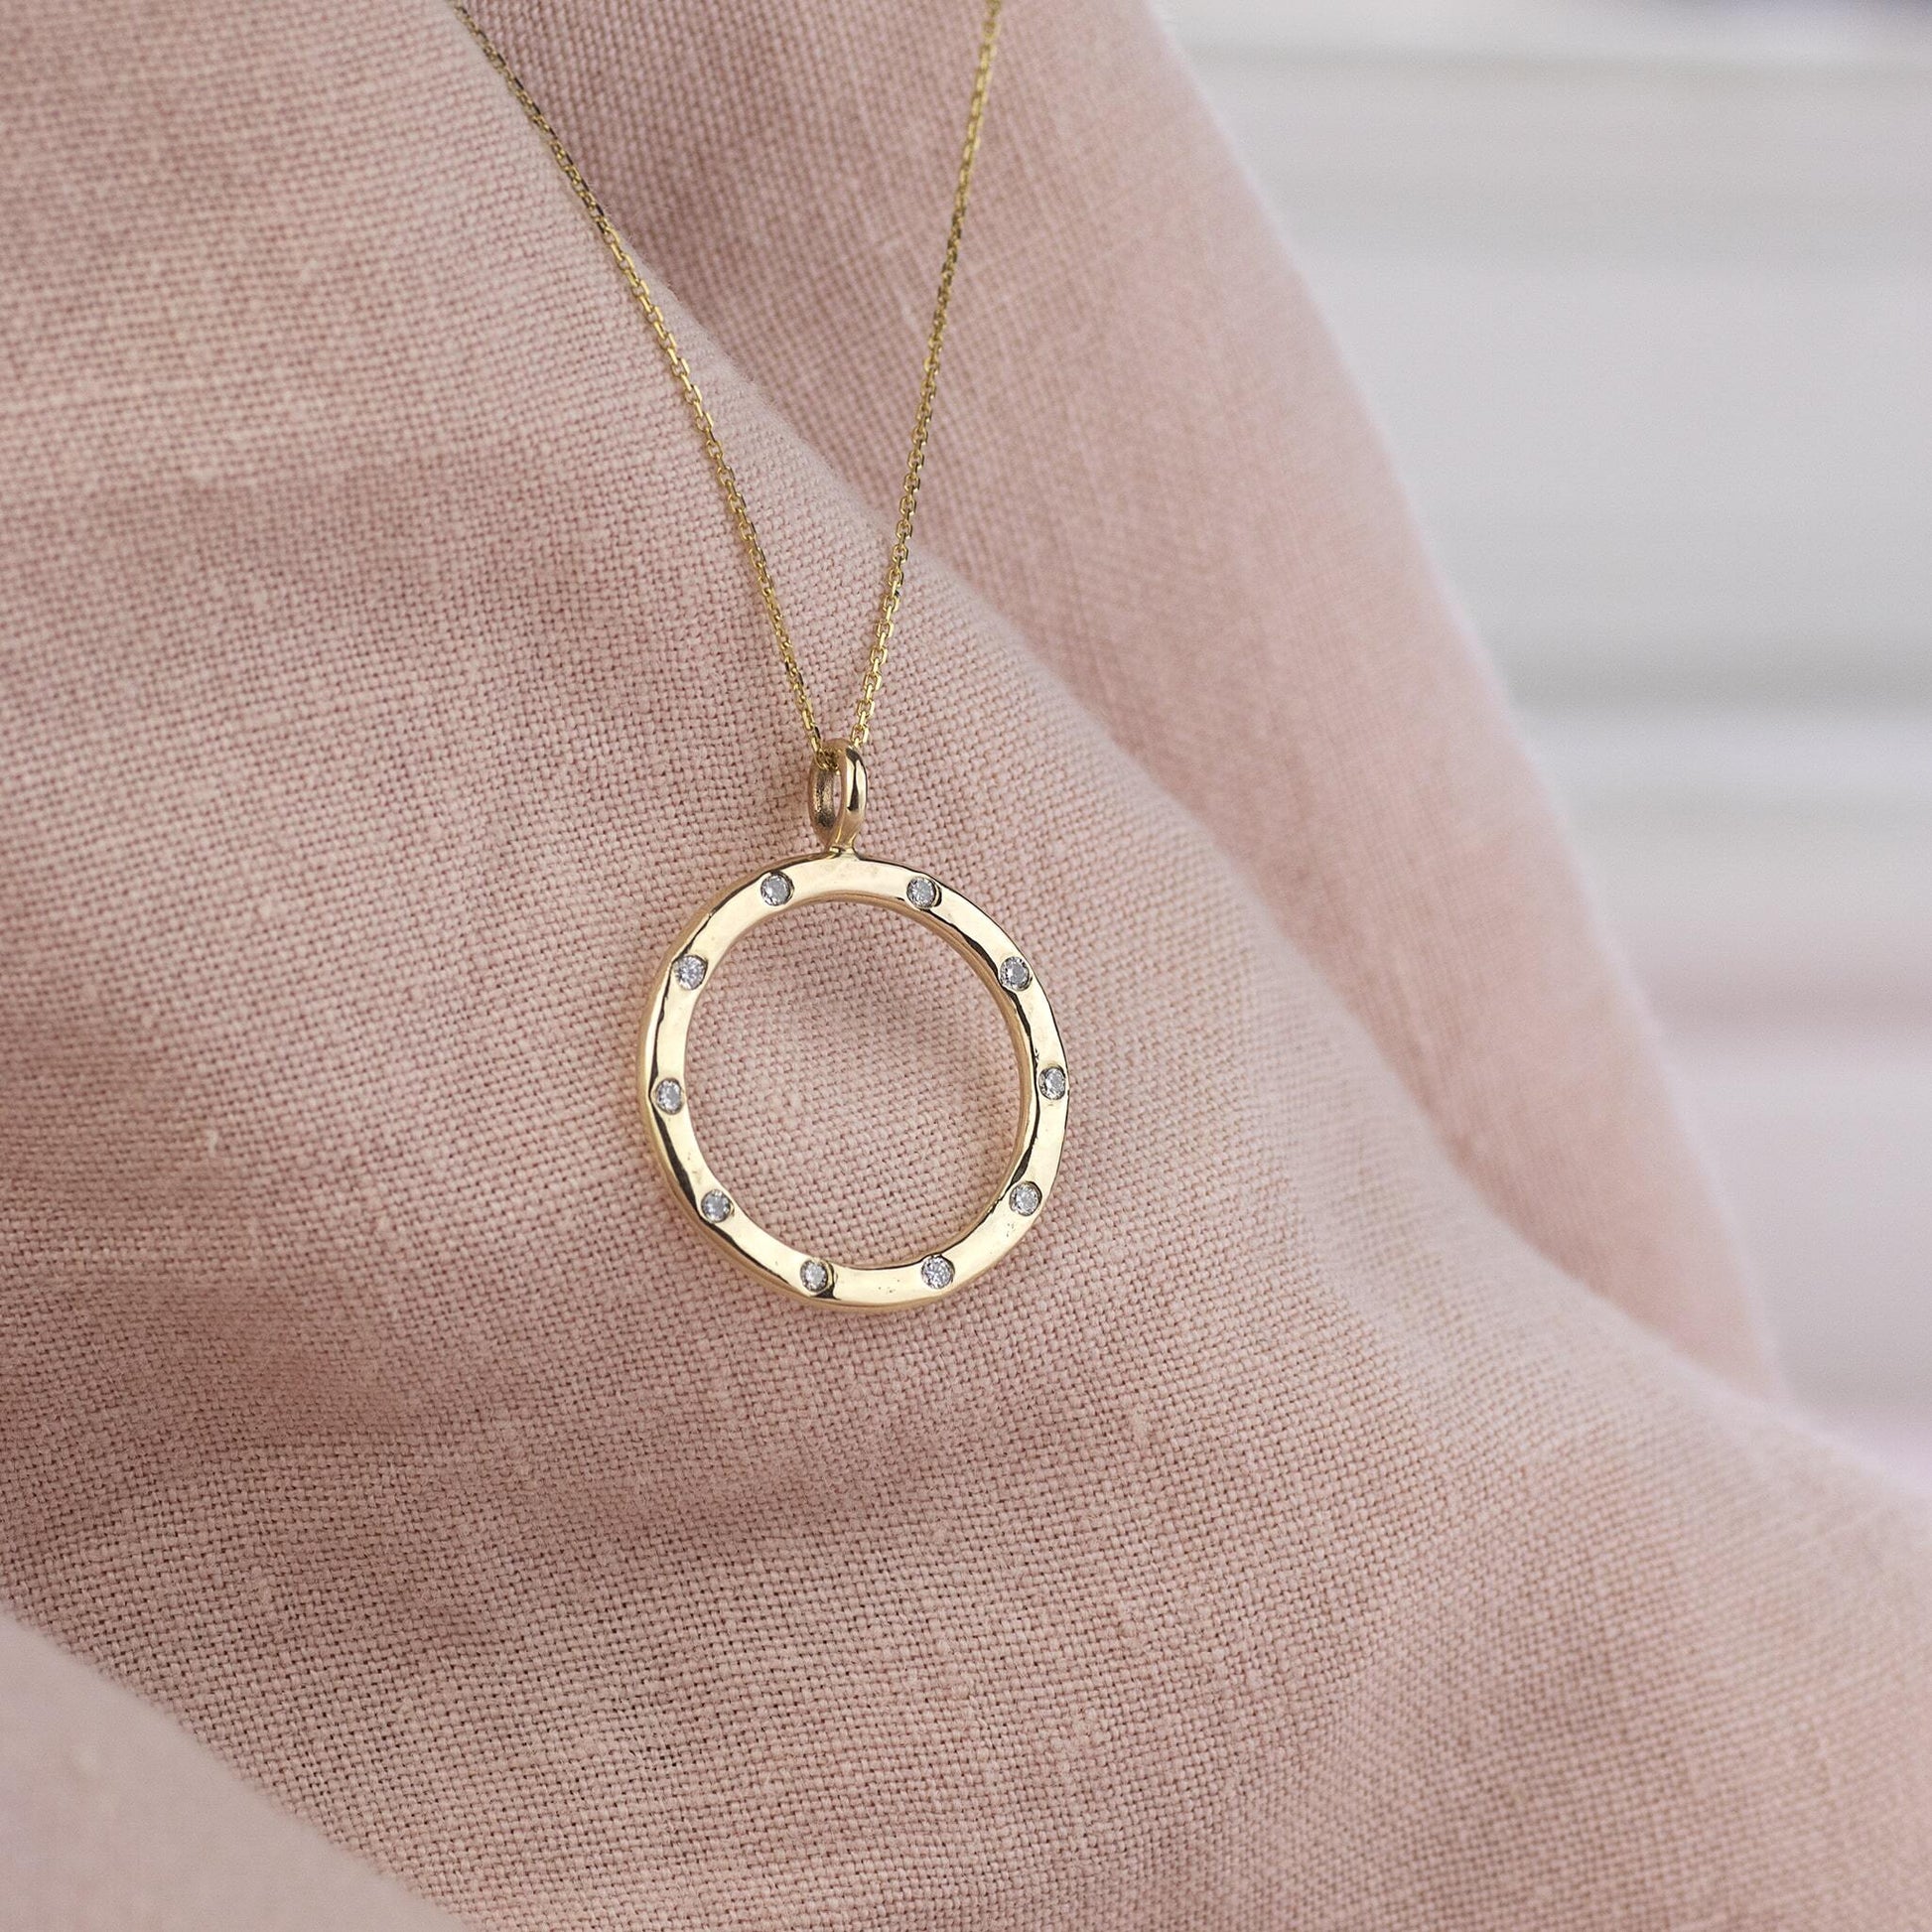 100th Birthday Gift - Recycled 9kt Gold Diamond Halo Necklace - 10 Diamonds for 10® Decades